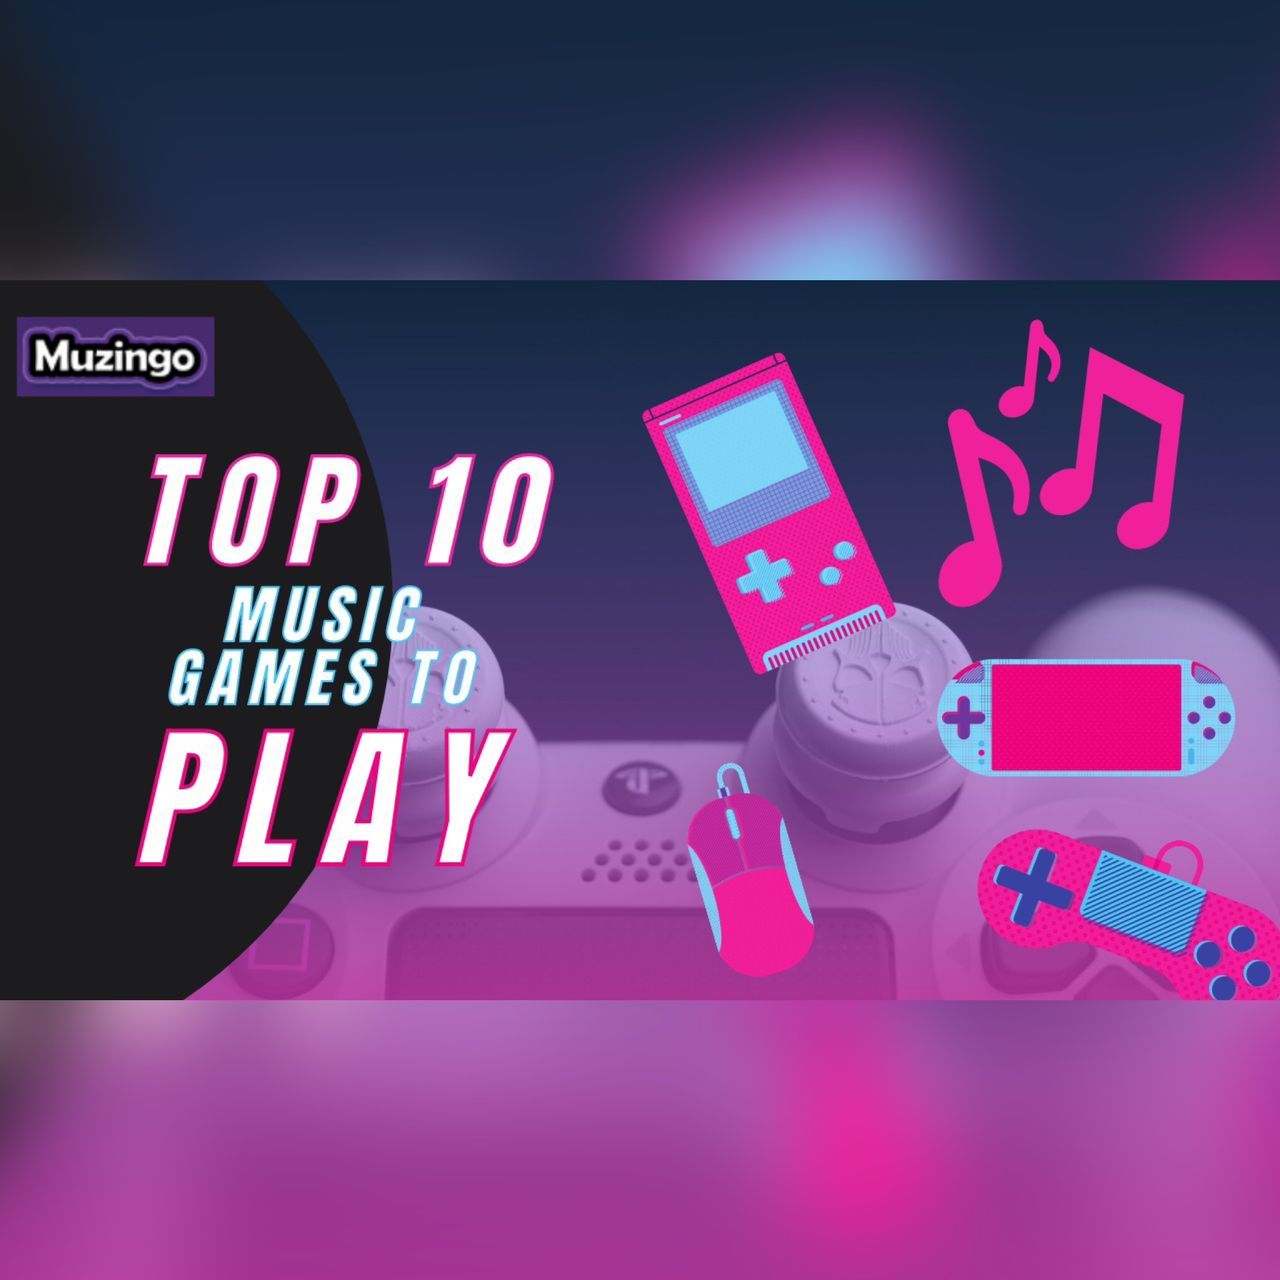 Top 10 music games to play